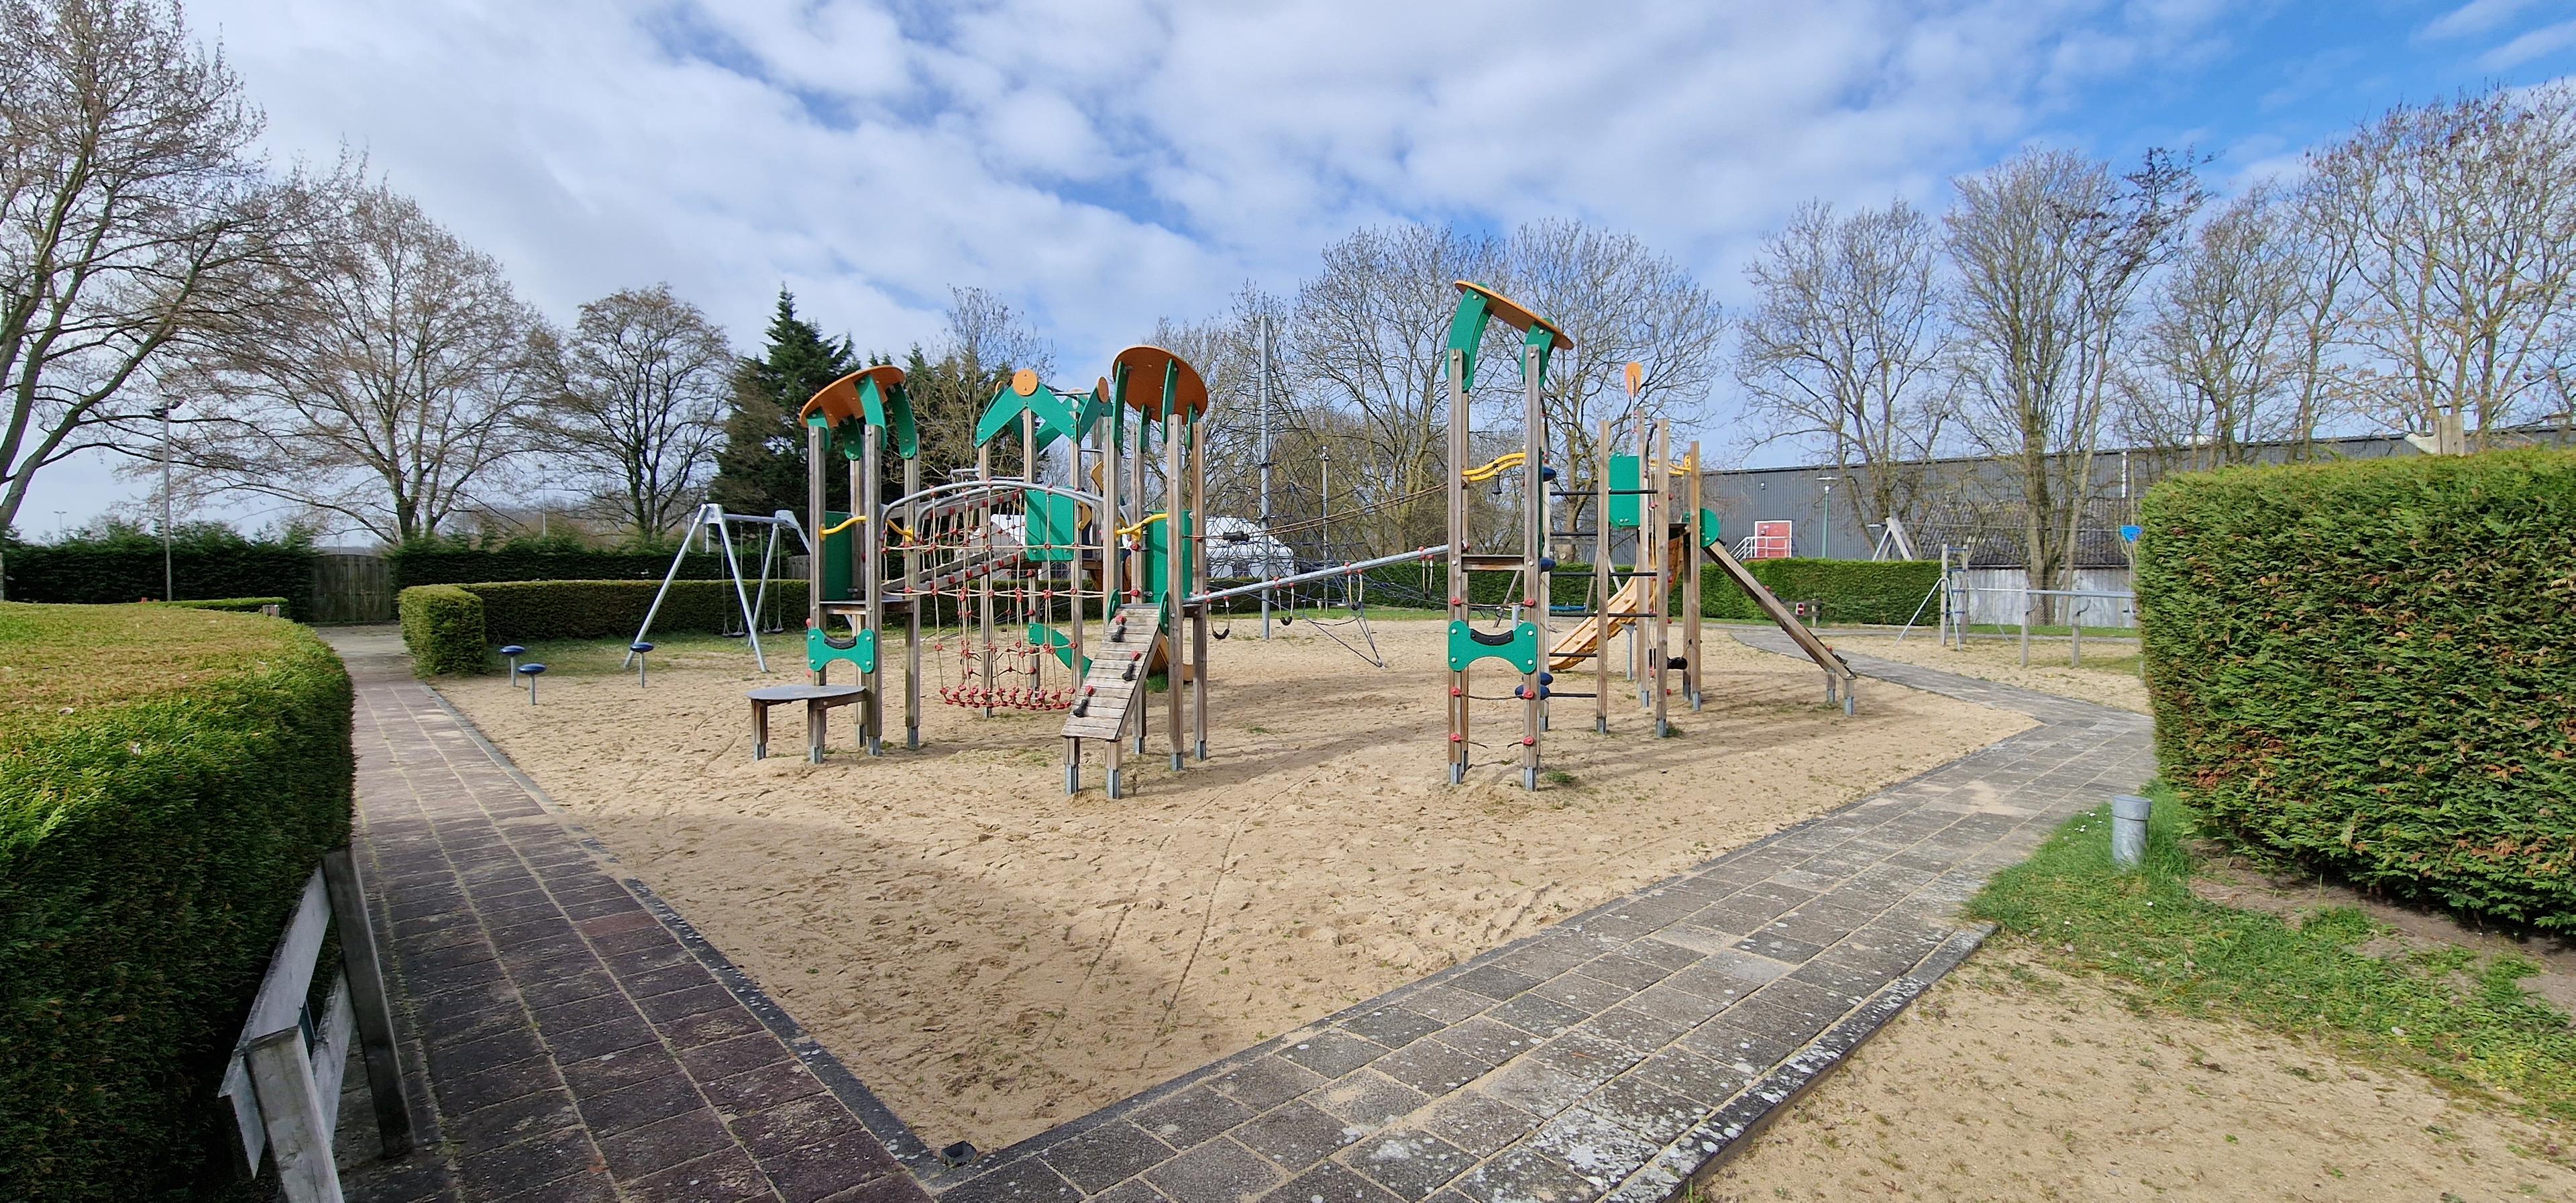 Overview photo of the climbing frame for kids up to about 8 years old